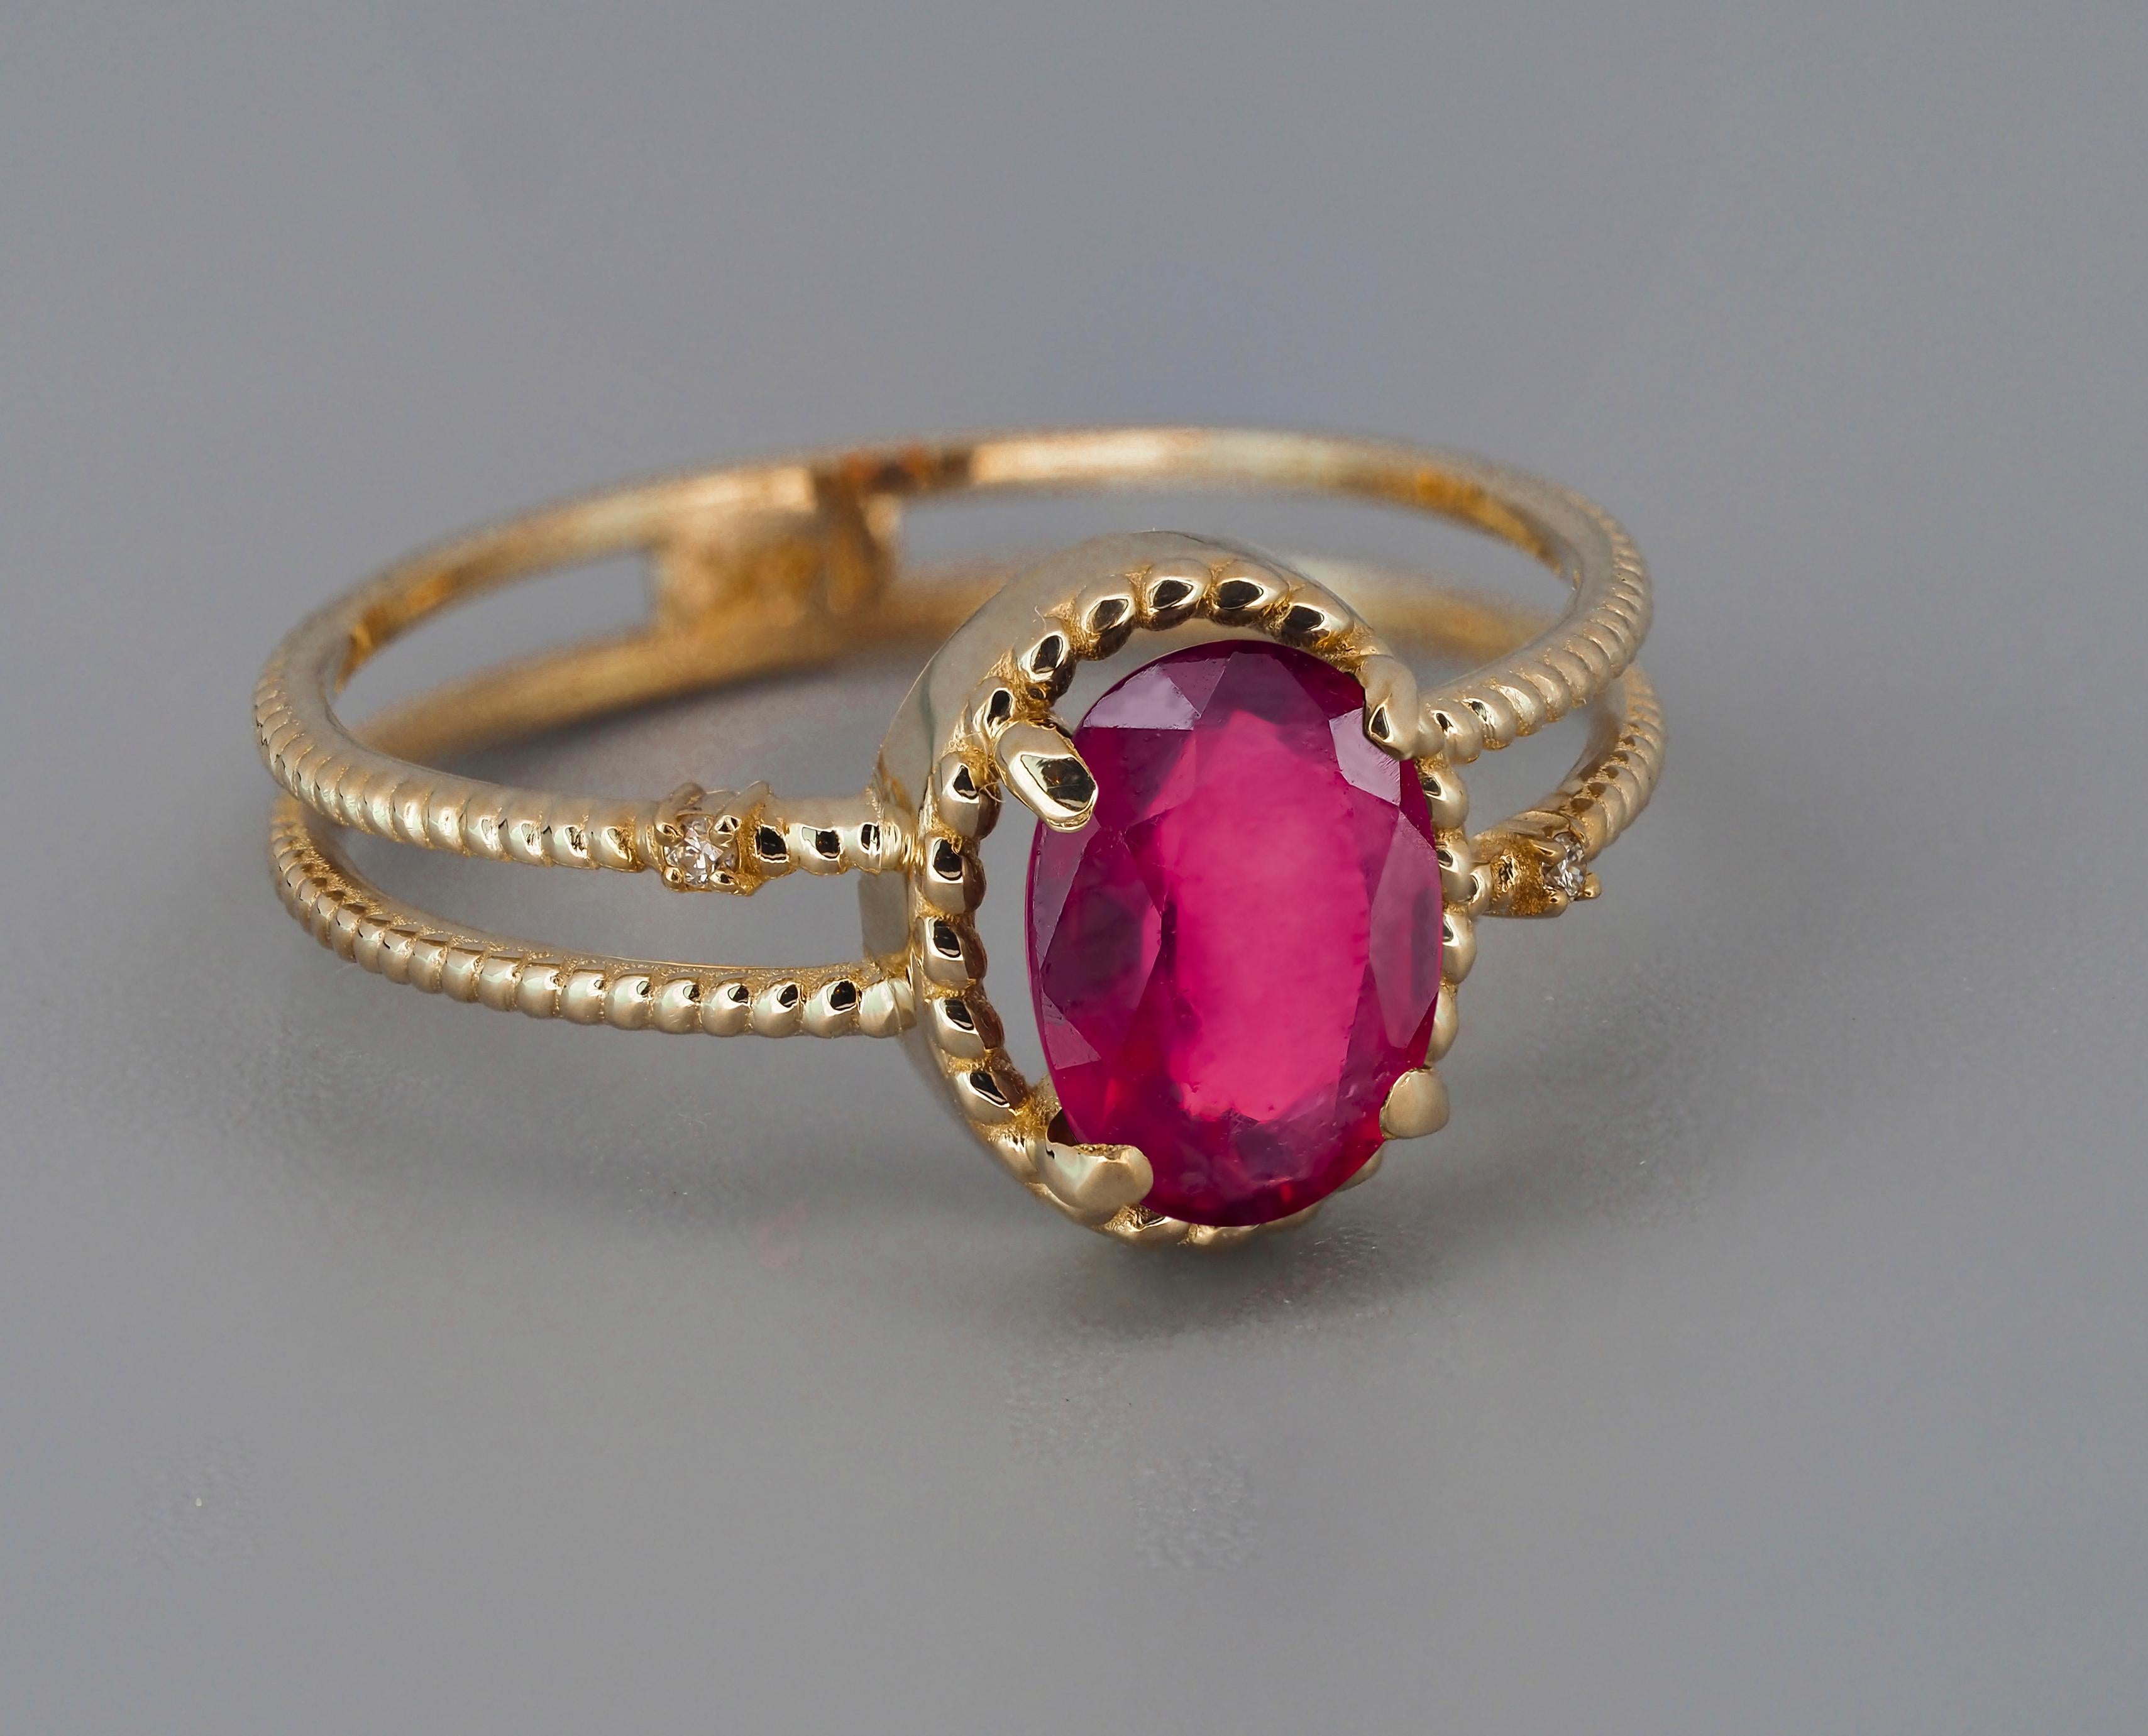 For Sale:  Oval Ruby Ring, 14k Gold Ring with Ruby, Minimalist Ruby Ring 3